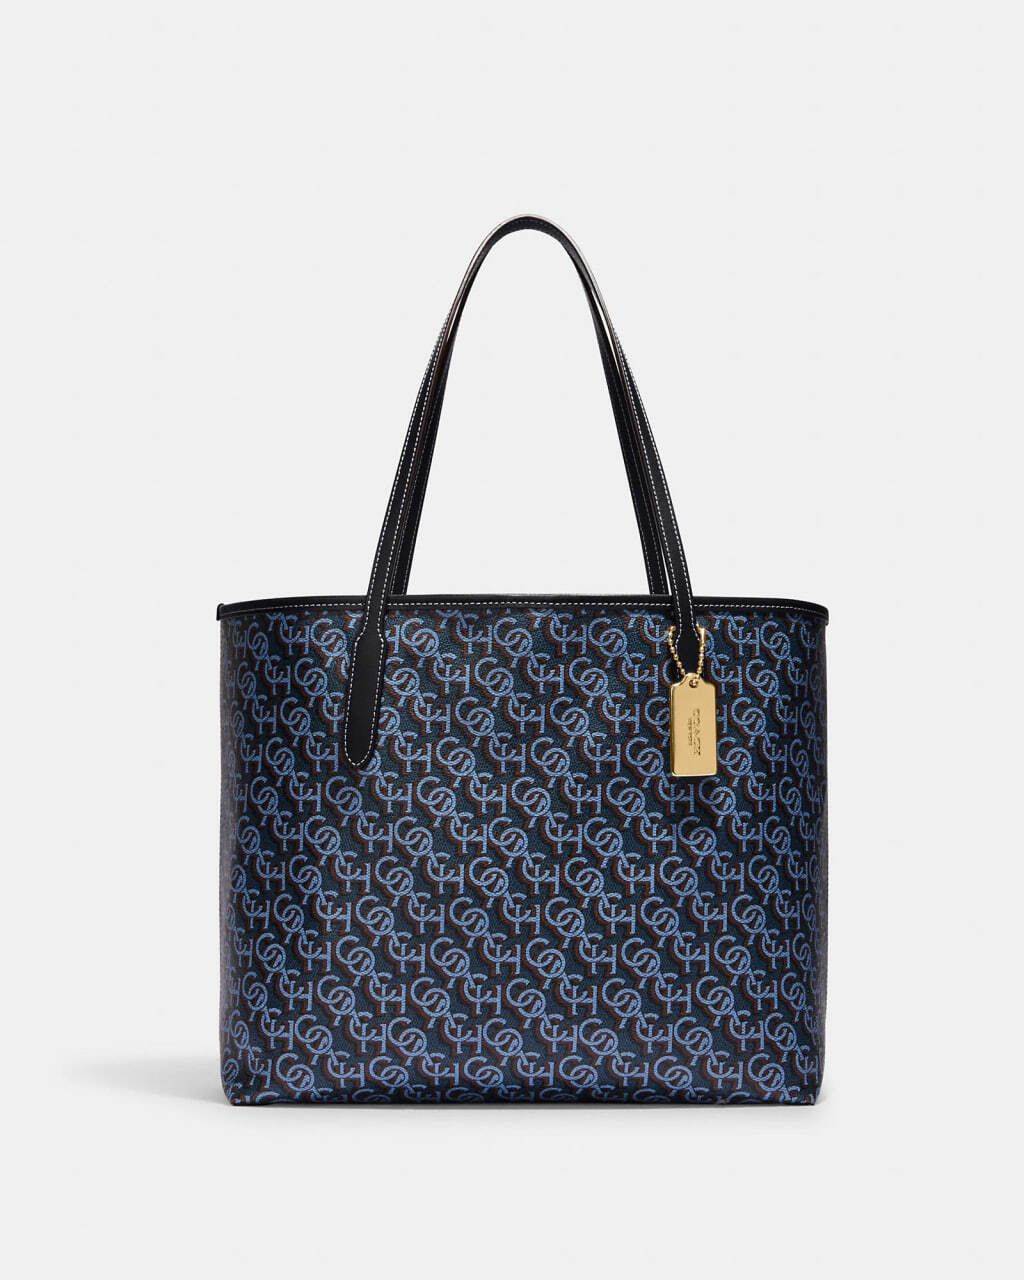 handbagbranded.com getlush outlet personalshopper usa malaysia ready stock Coach Malaysia Coach City Tote With Coach Monogram Print in Navy